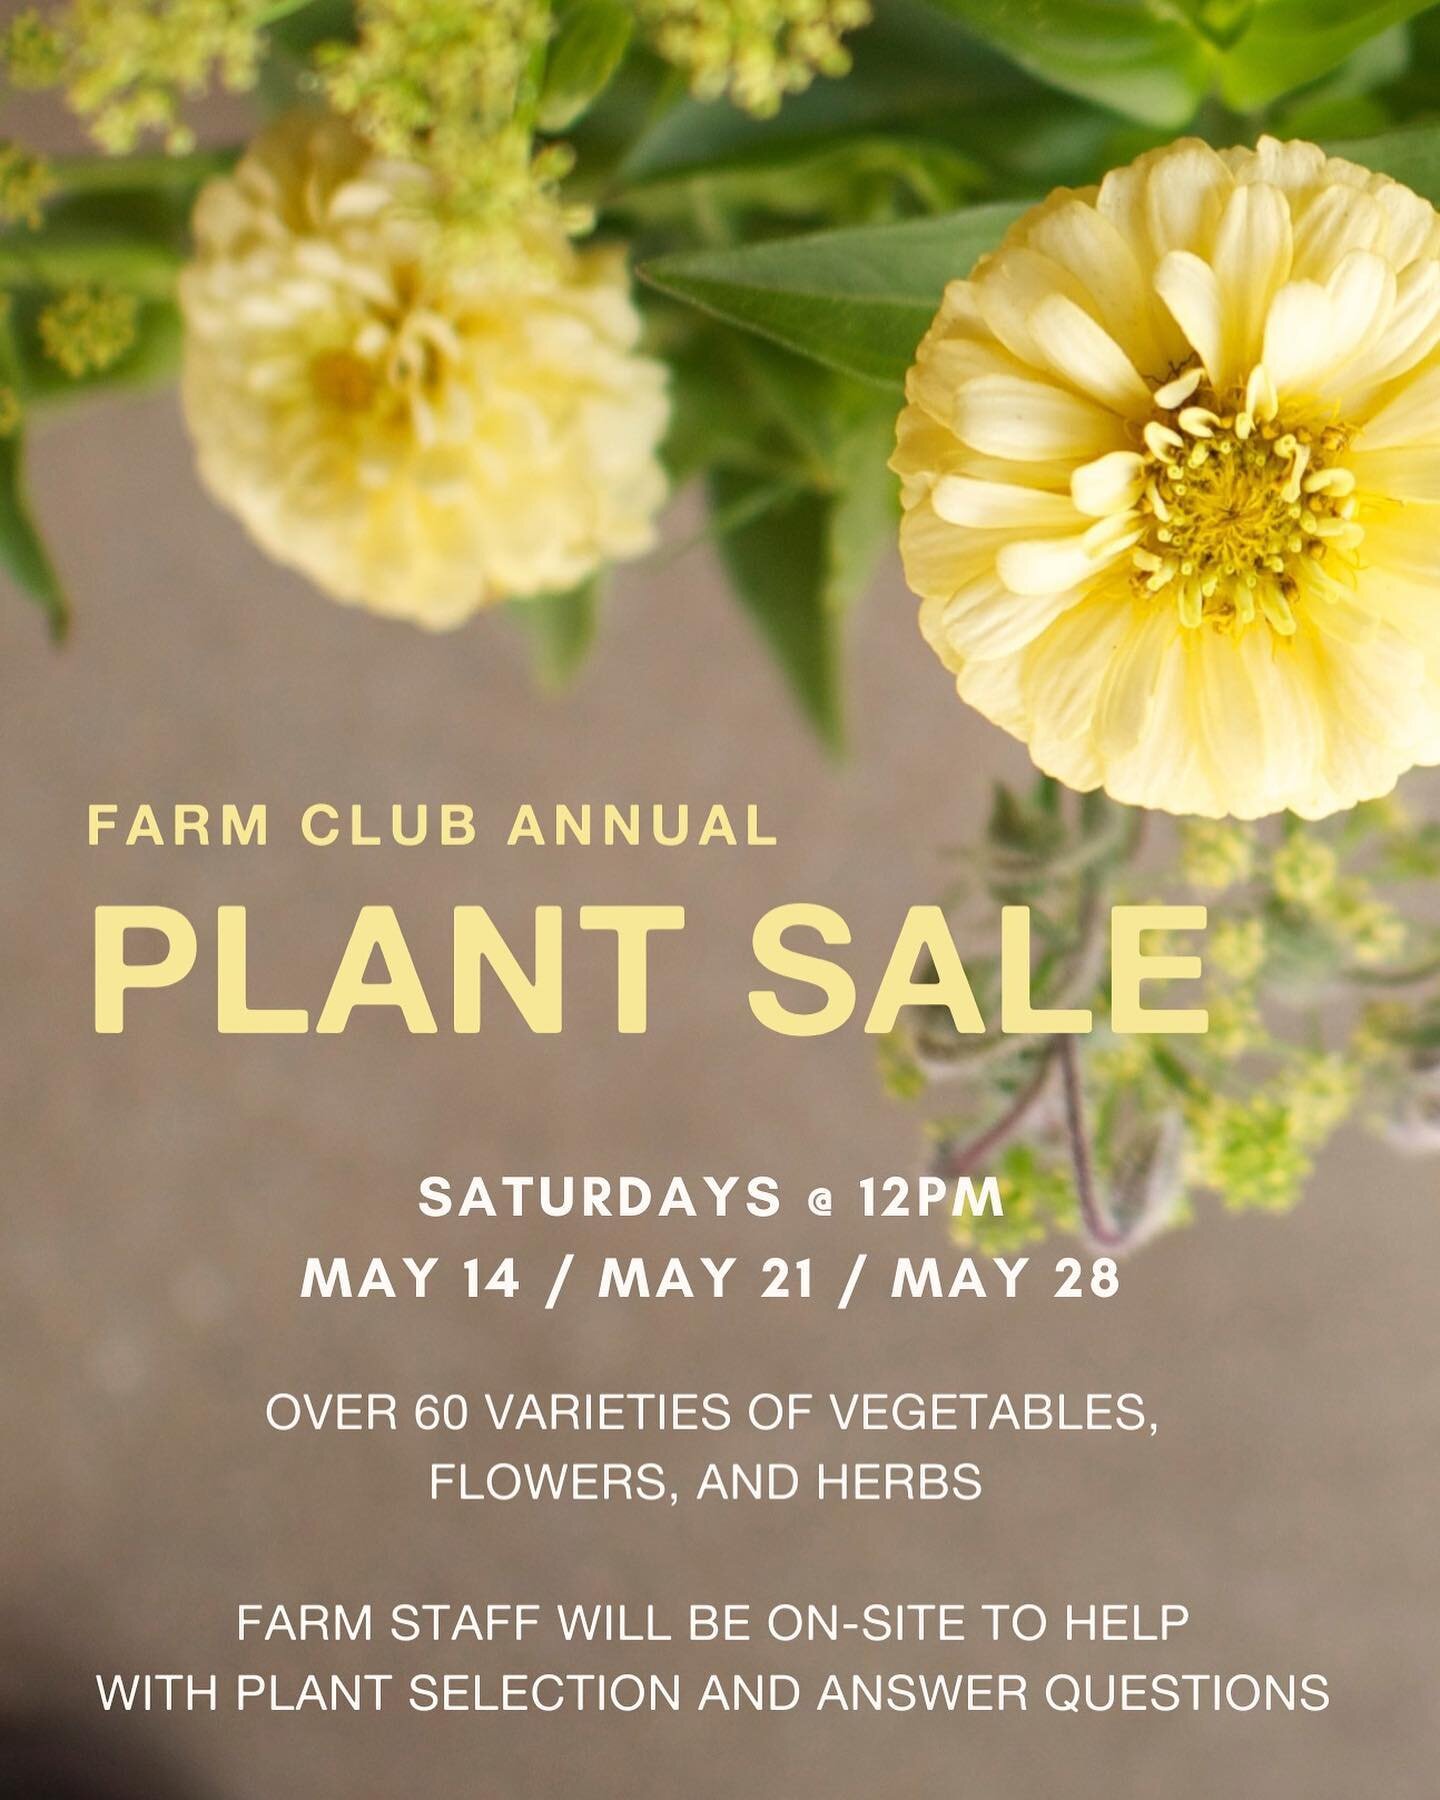 Our plant sale will take place at Farm Club this year! No need to place pre orders, the farmers are busy planting up a storm so we can have plenty of selection and a huge variety of extra fancy plants. Nic, Melinda and the Loma crew will be at each p